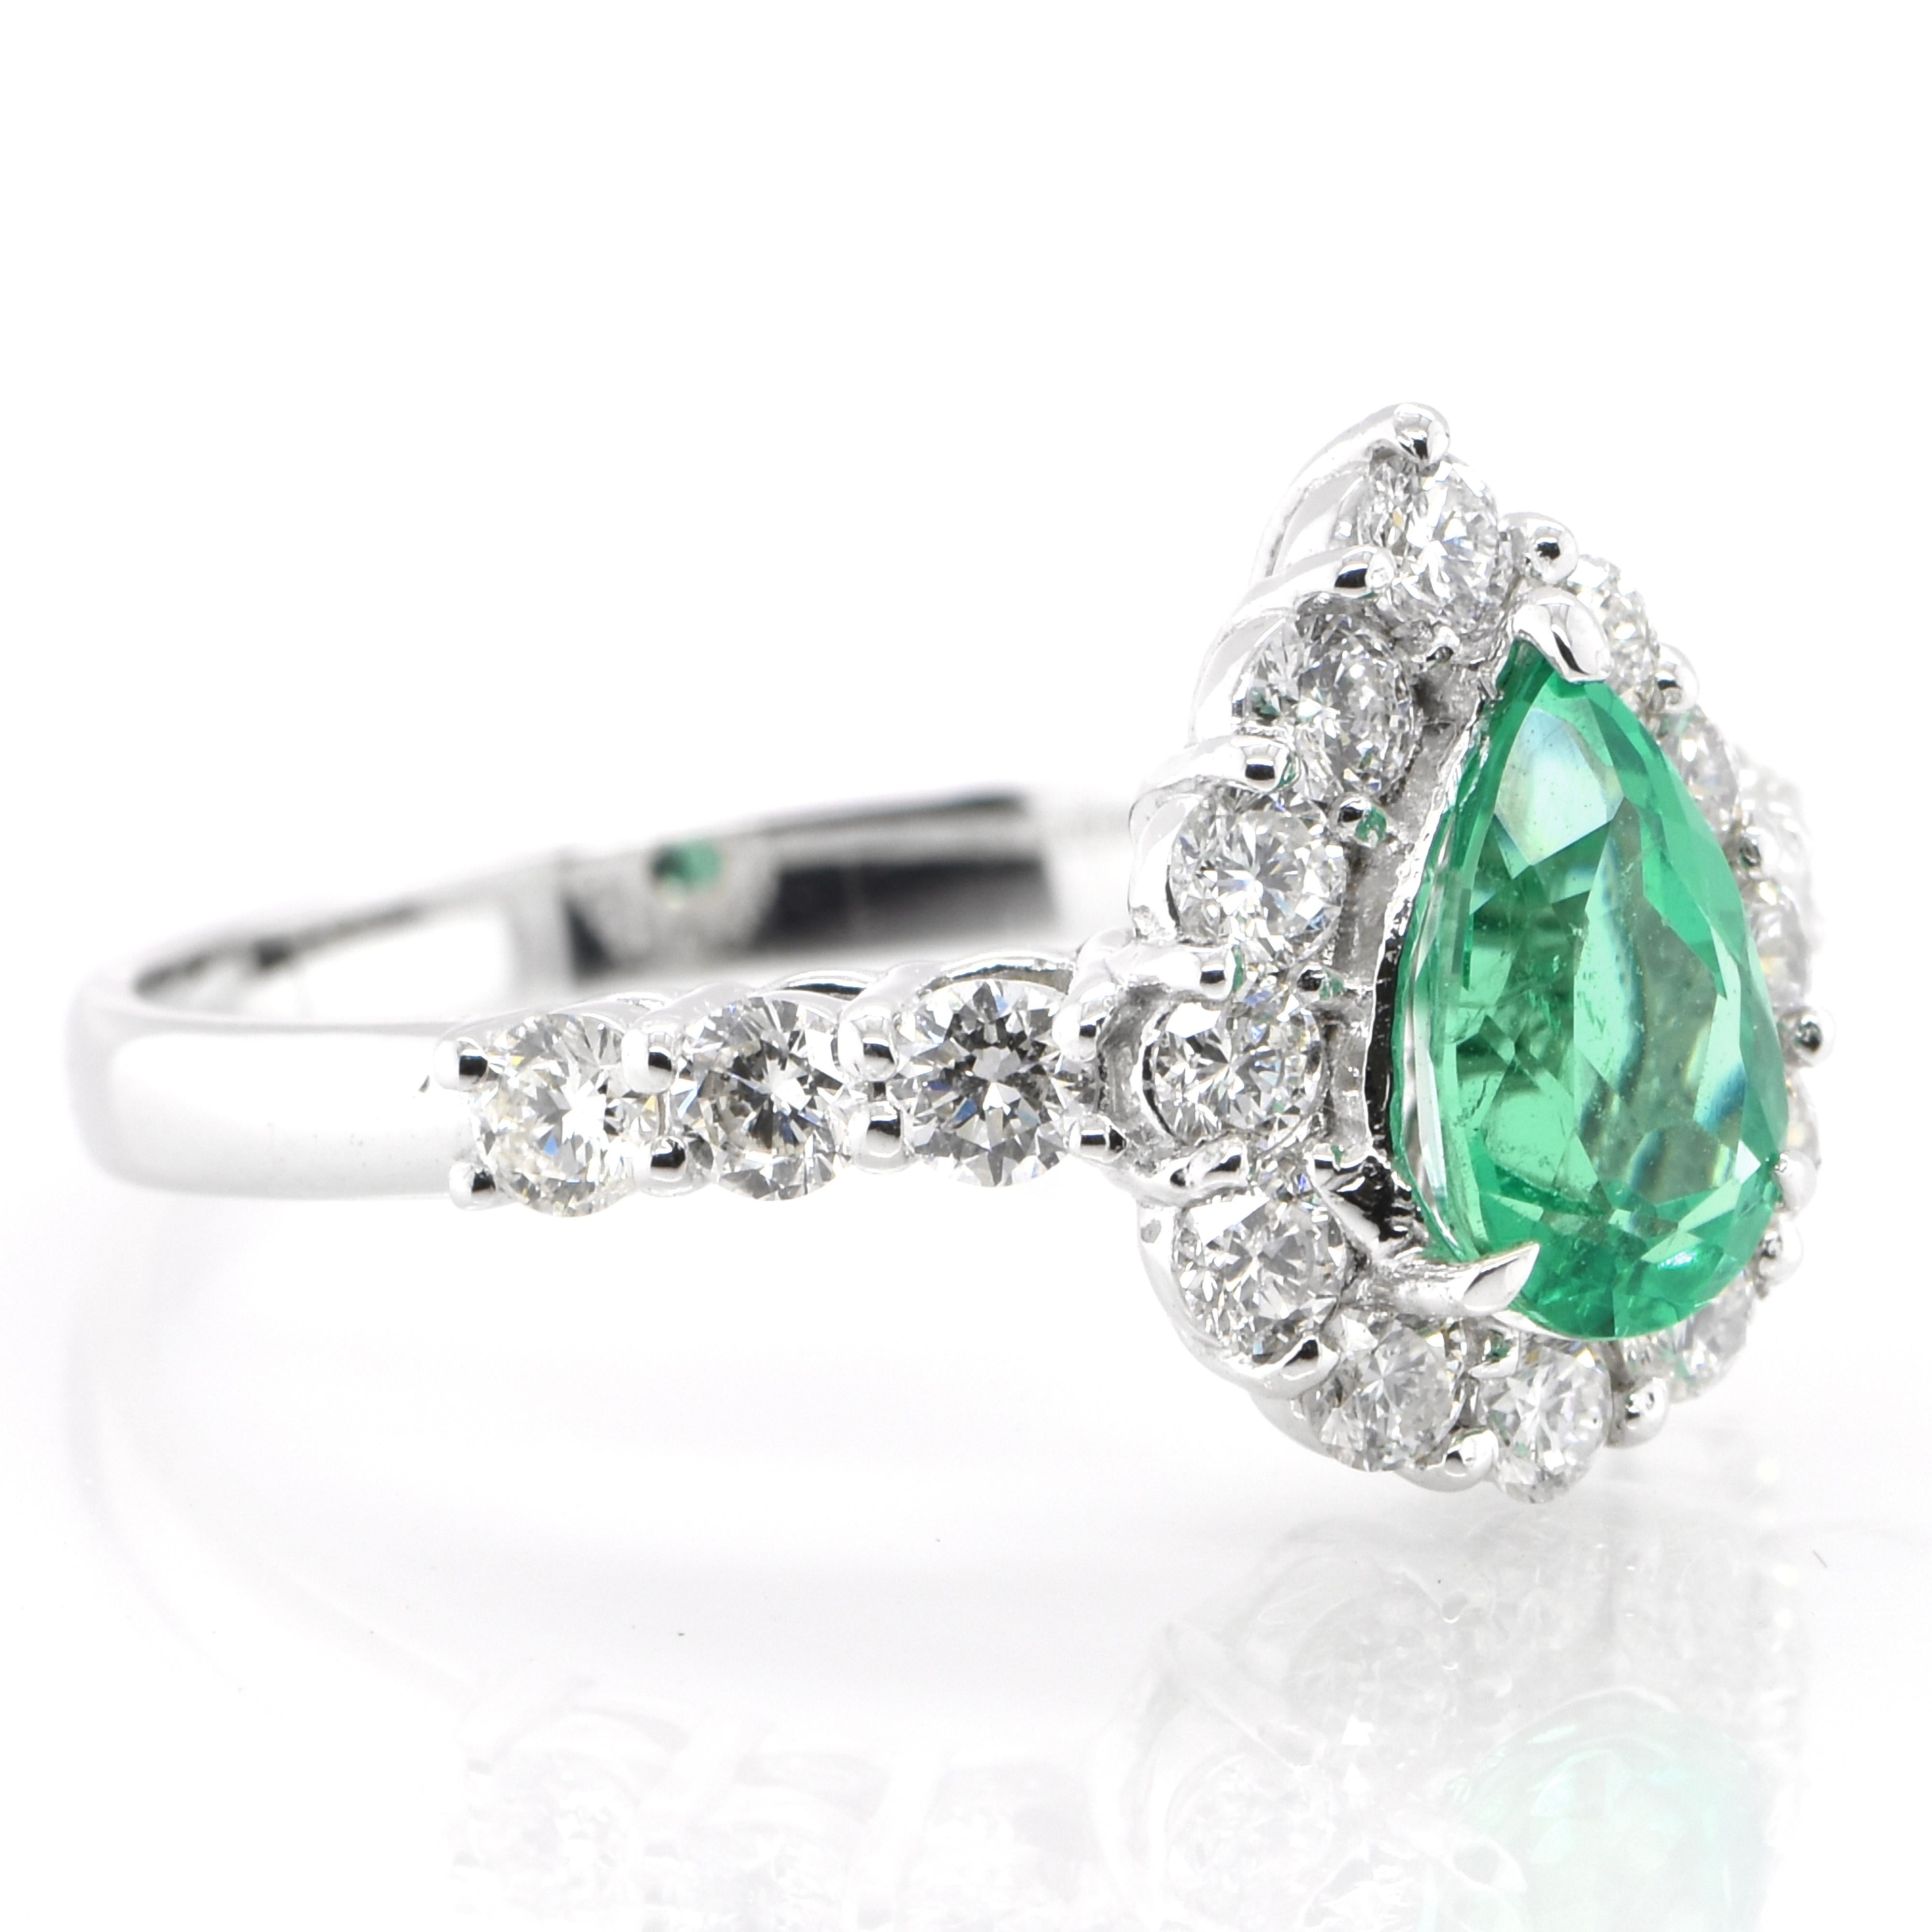 Modern 0.75 Carat Natural Pear-Cut Emerald and Diamond Halo Ring Set in Platinum For Sale